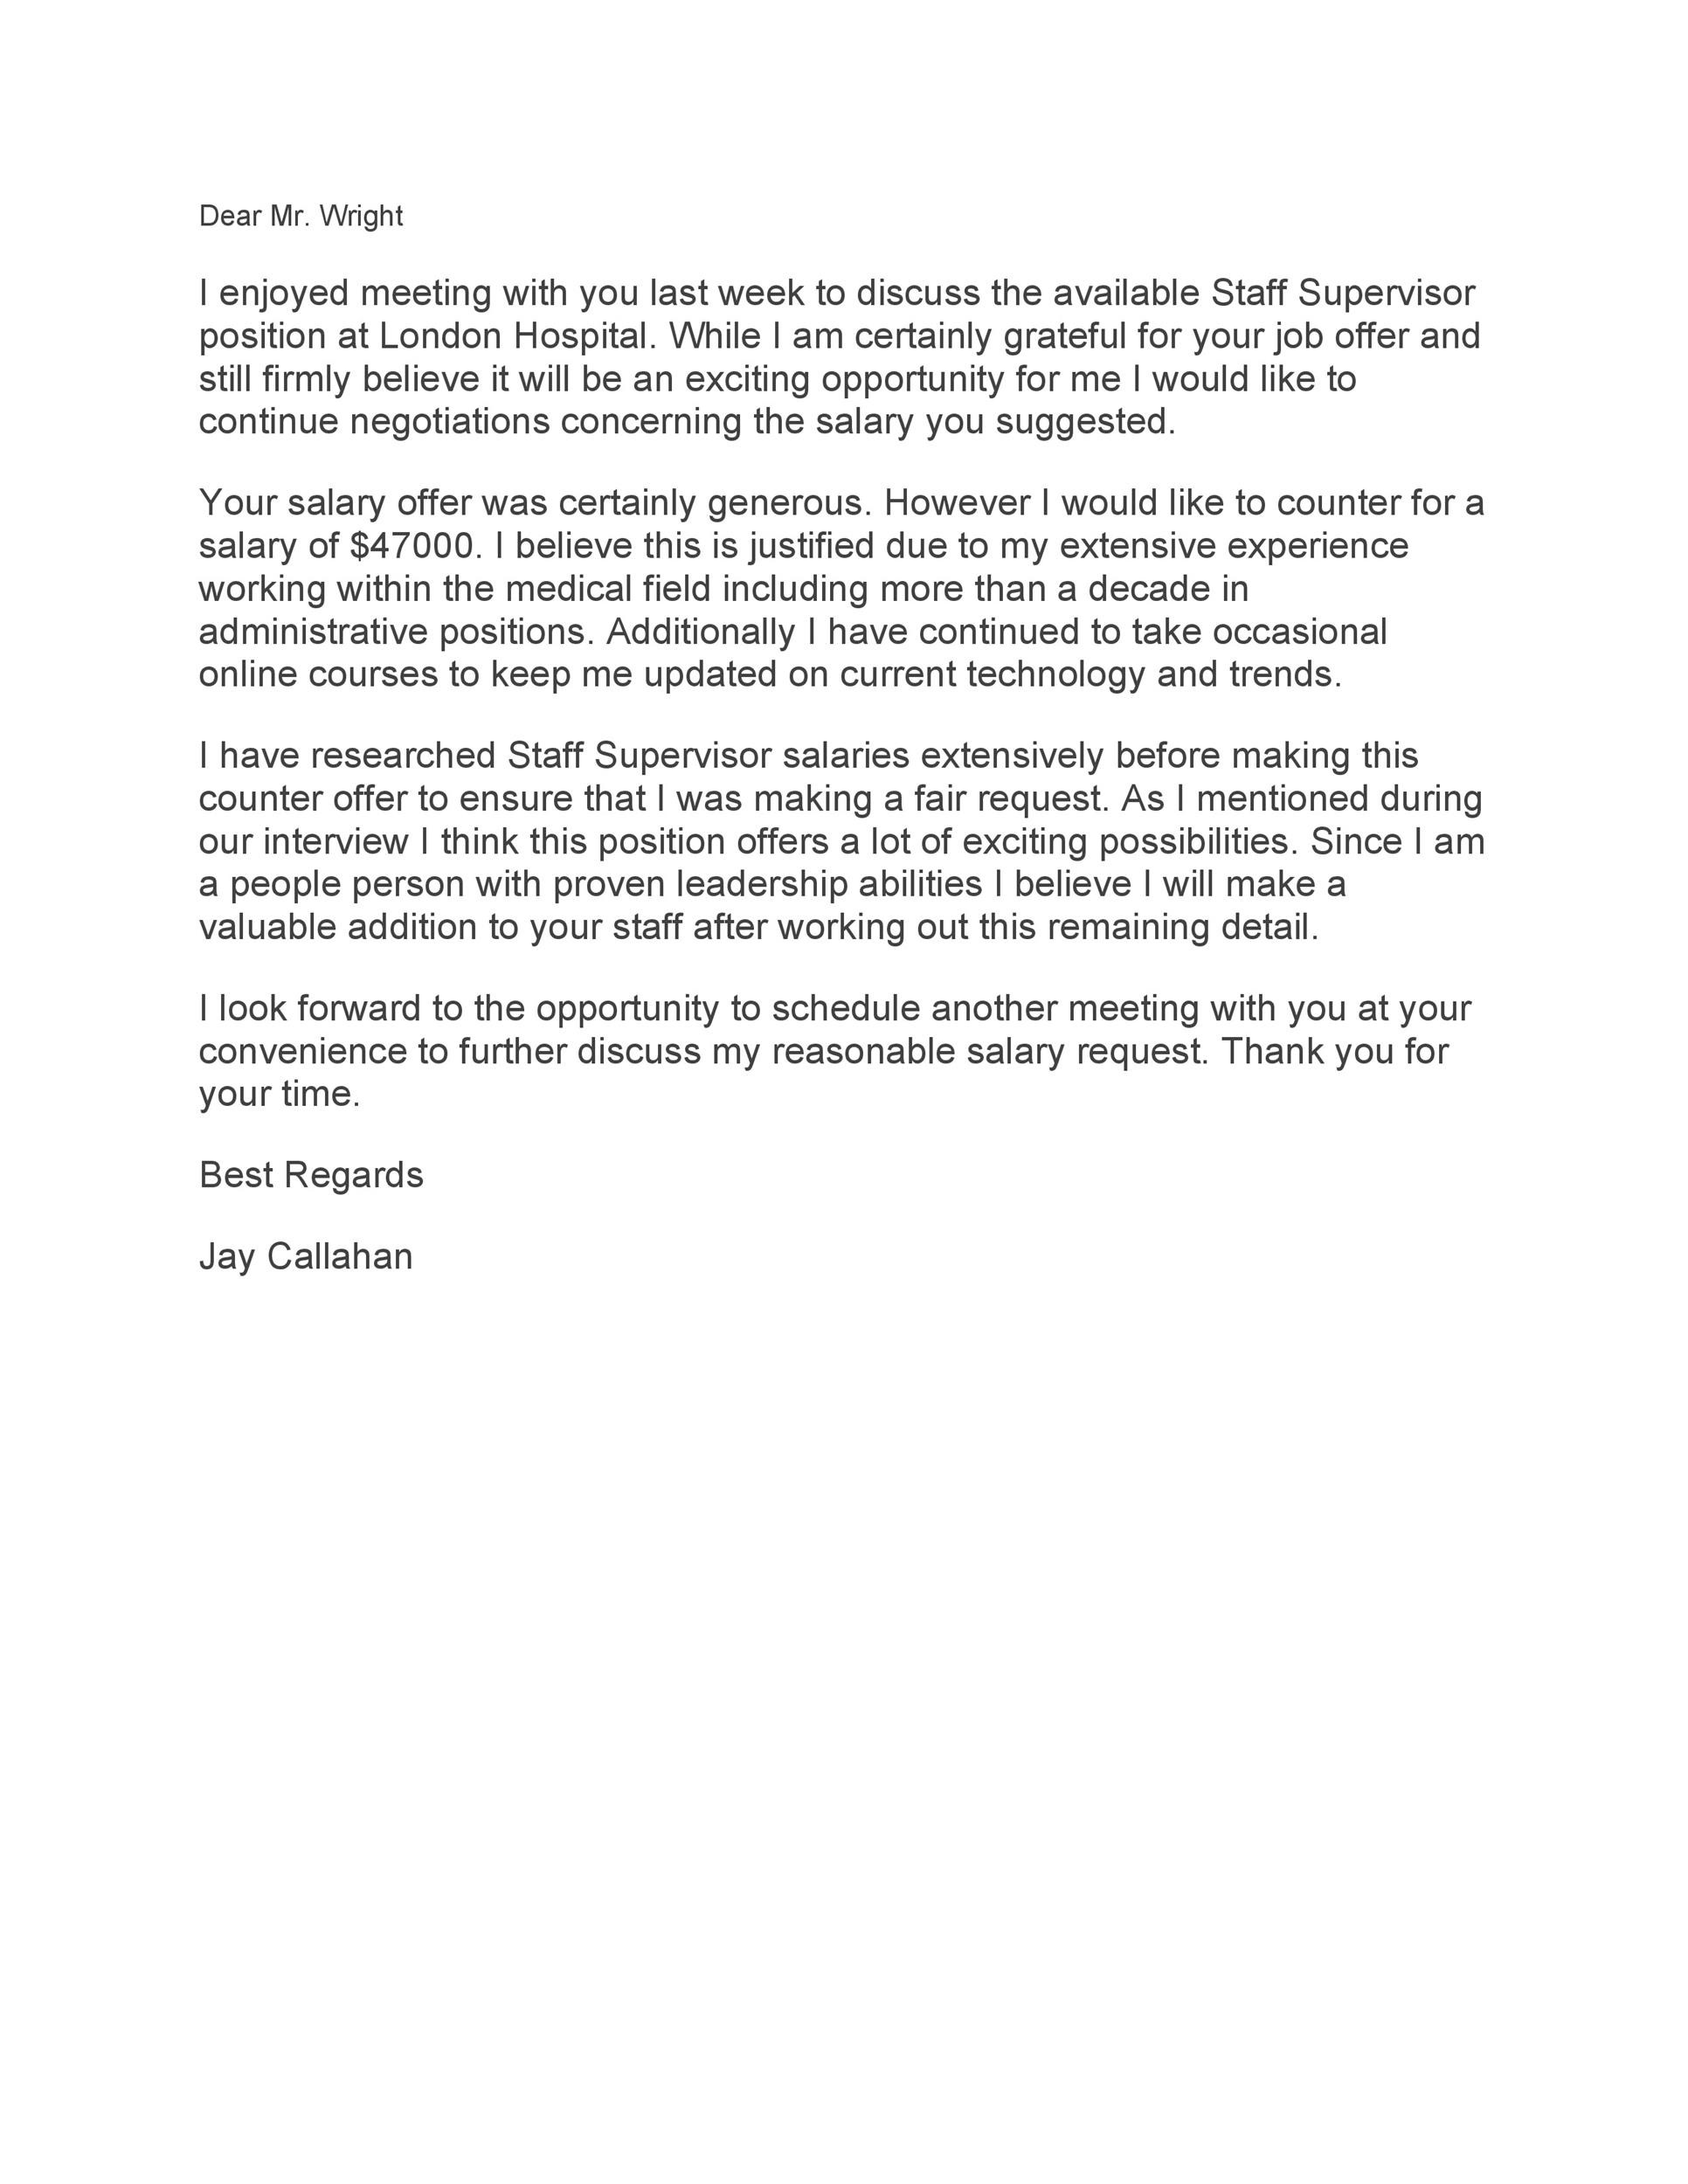 Sample Letter Requesting An Interview For Job from templatelab.com